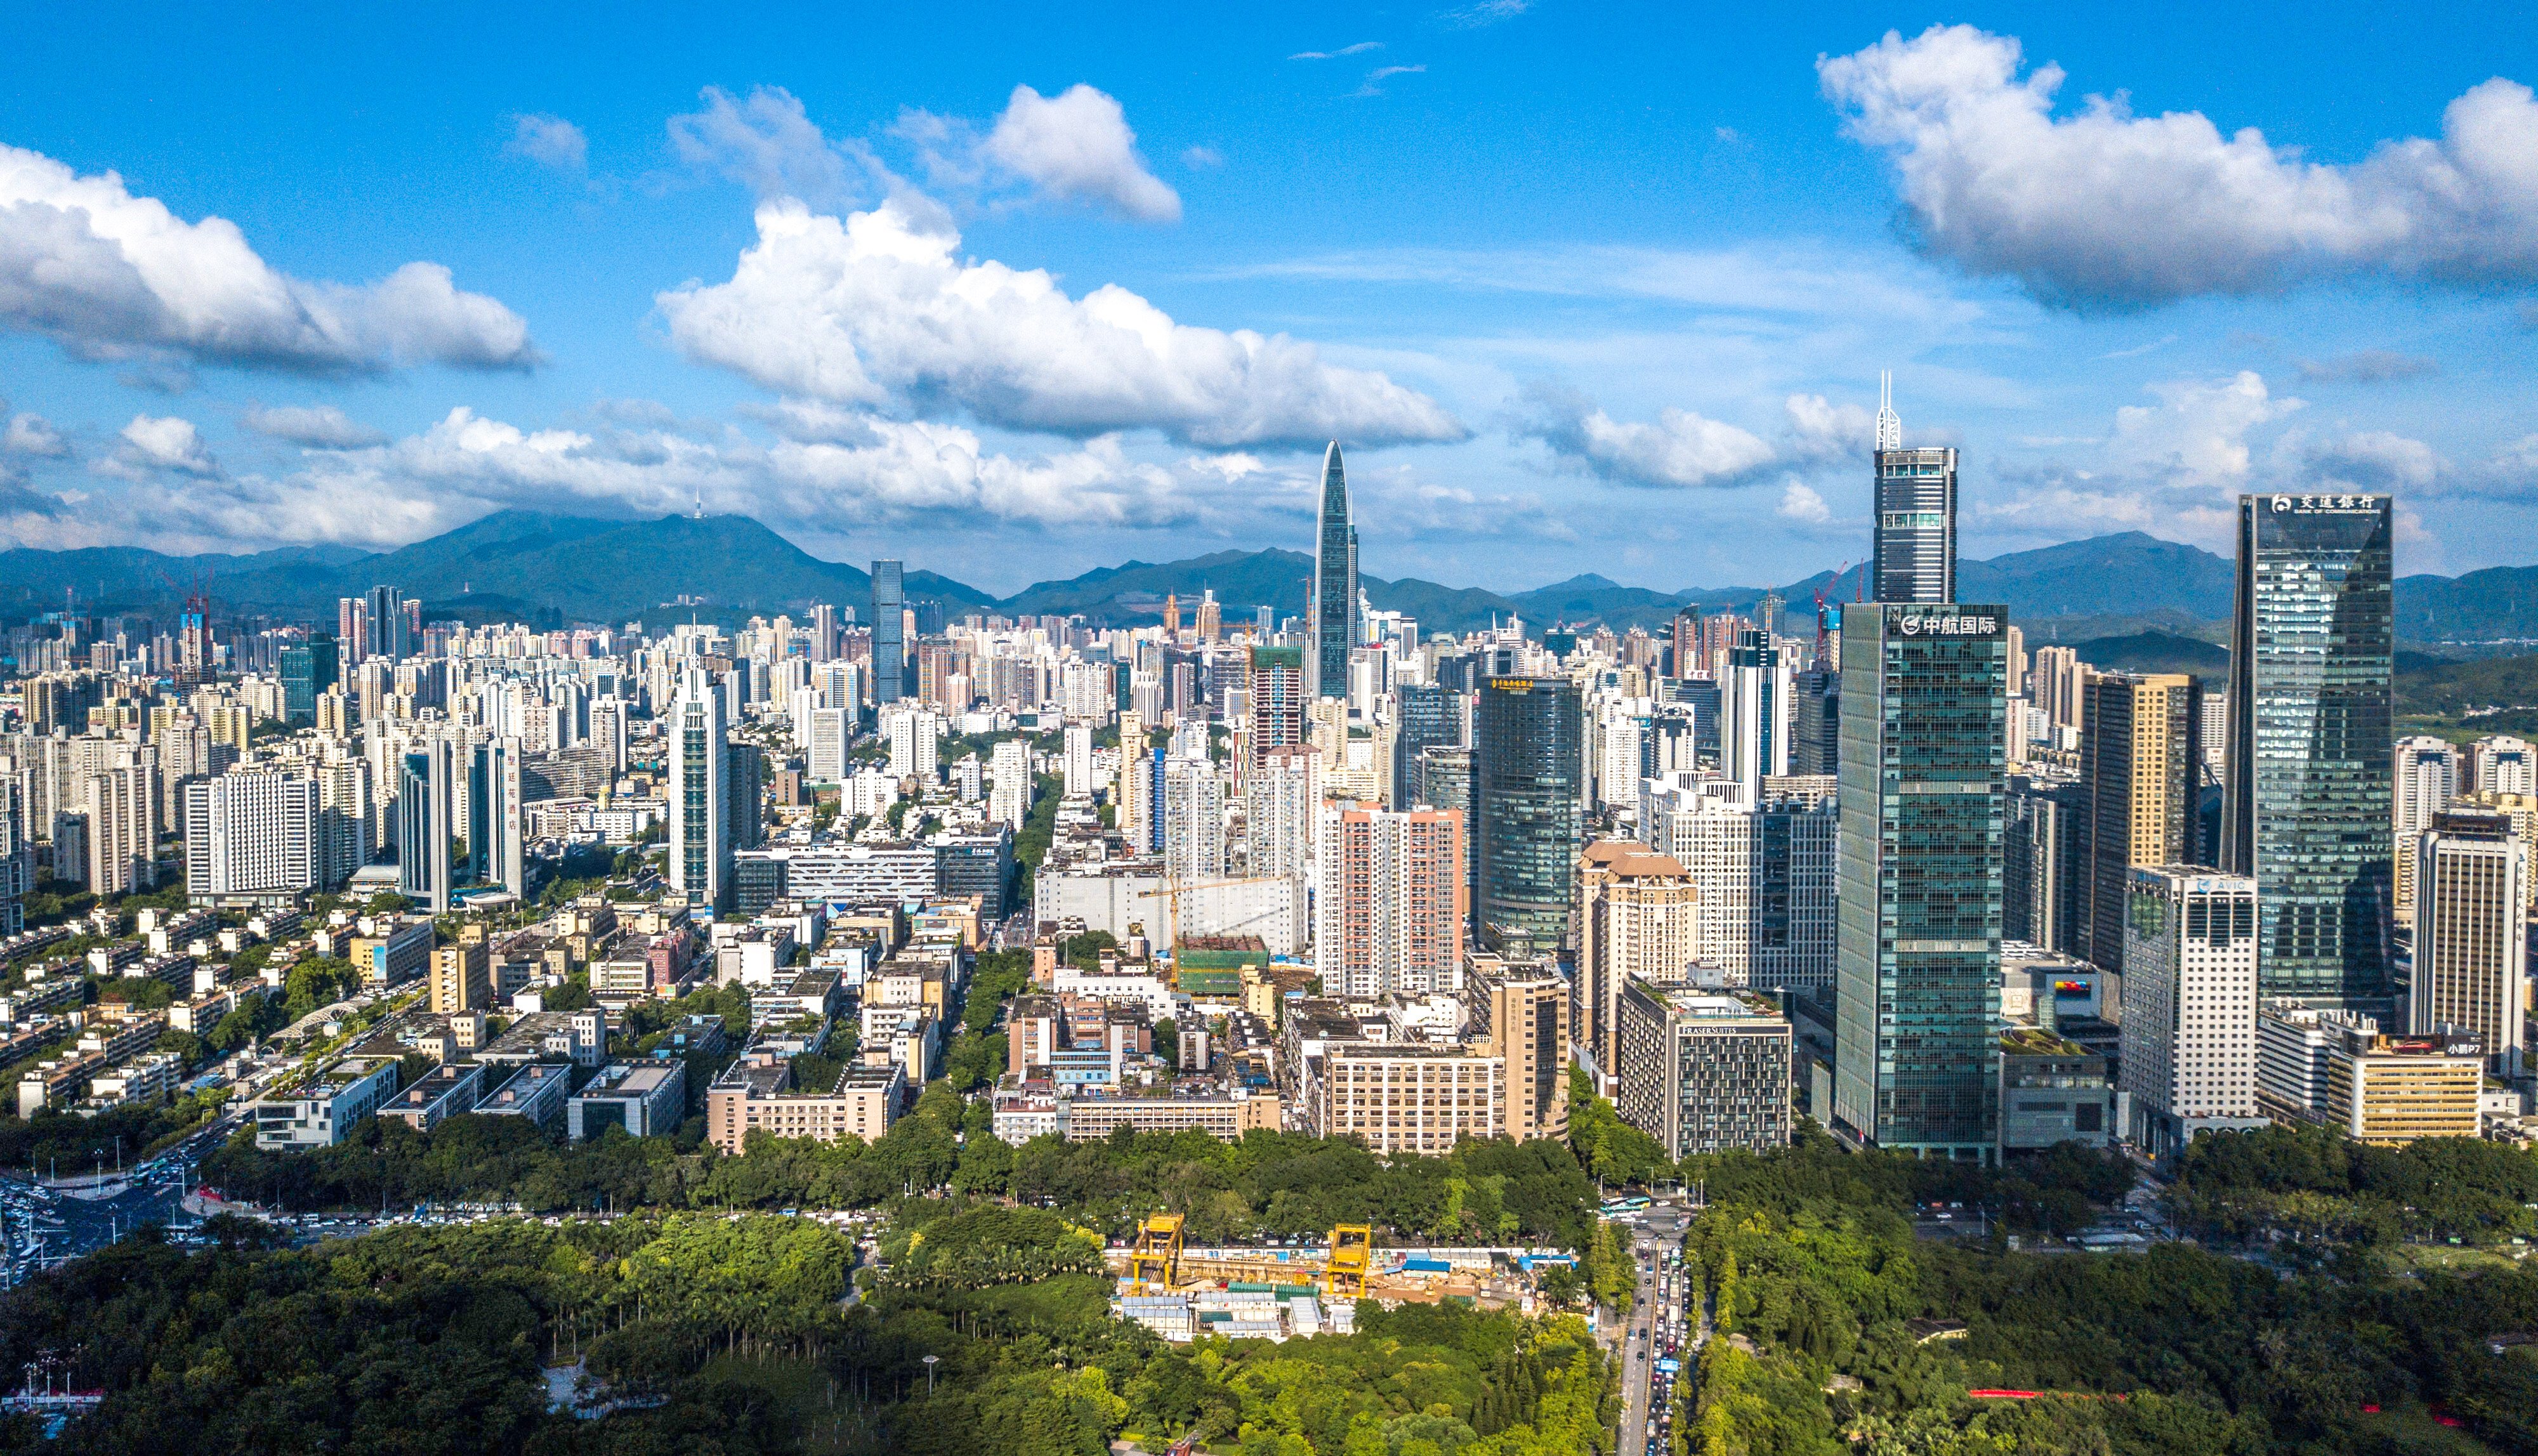 Shenzhen, China’s tech hub, is one of the main cities that make up the Greater Bay Area. Photo: Xinhua